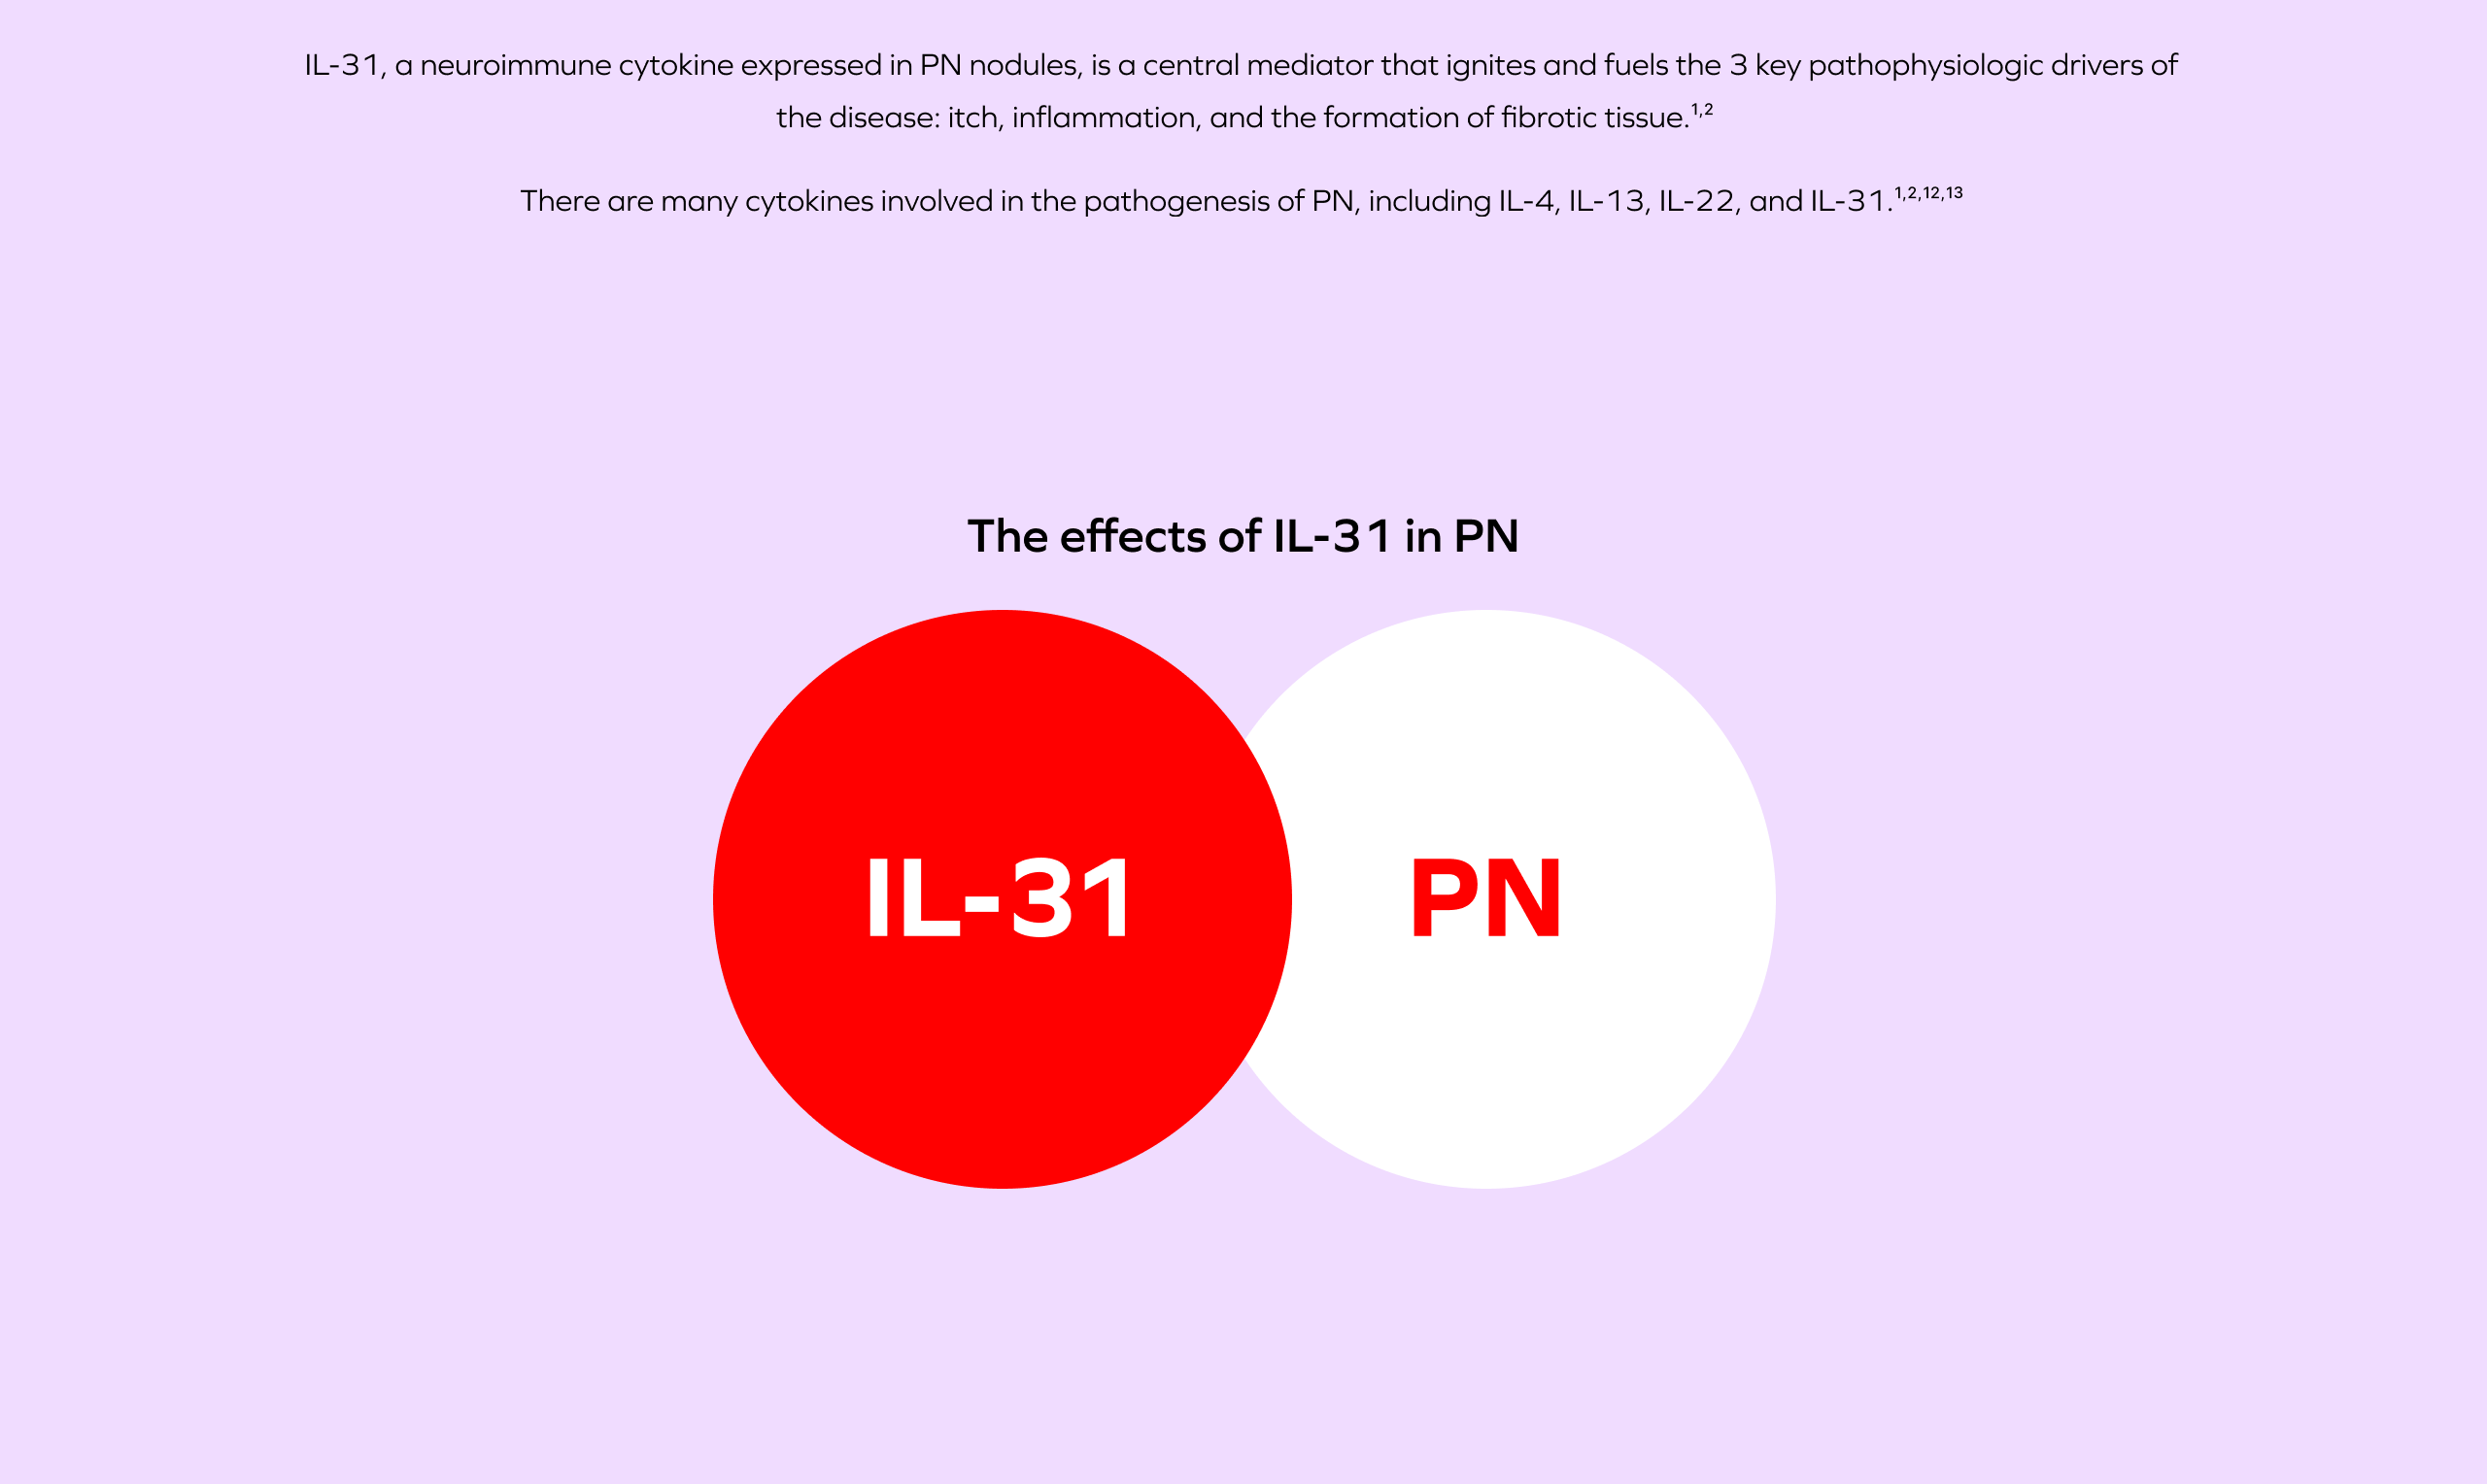 A red circle labeled "IL-31" that overlaps with a white circle labeled "PN."